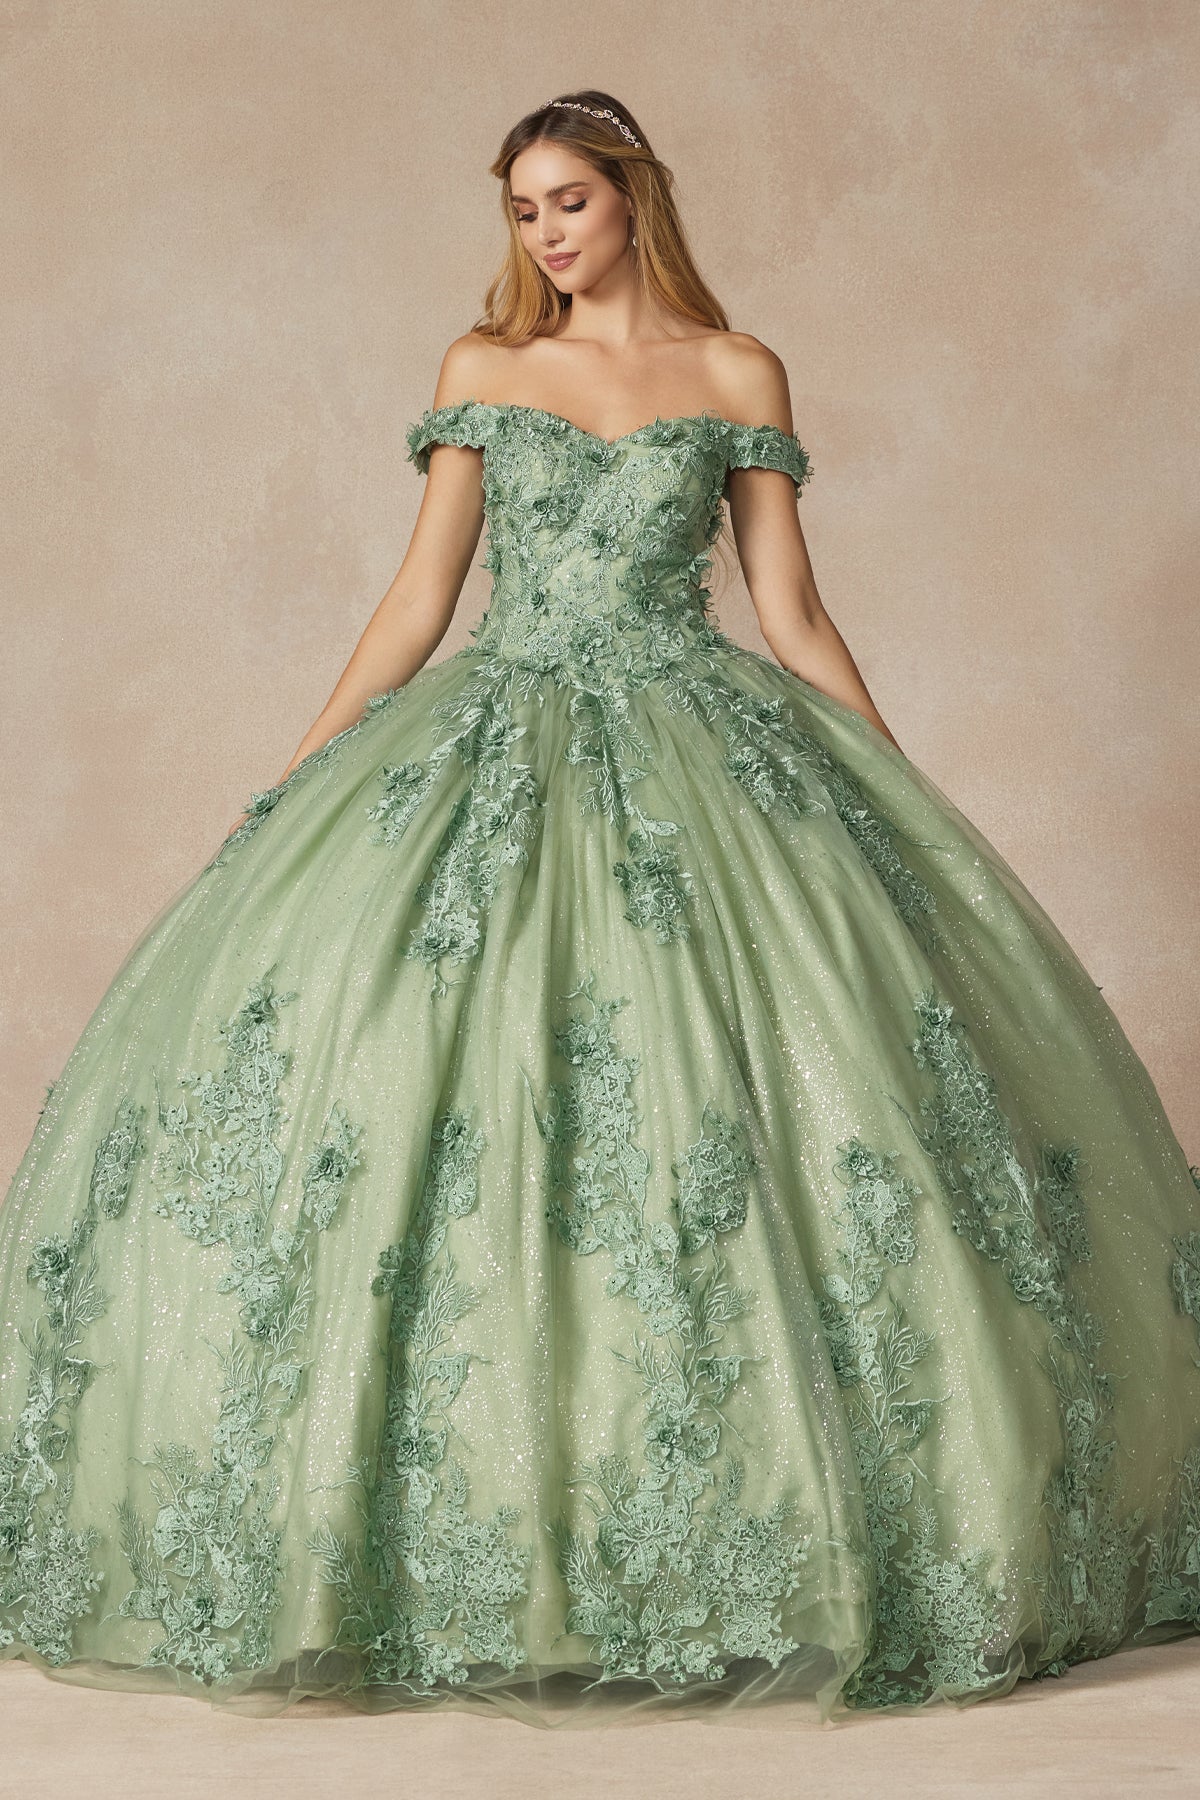 3D floral appliques with off shoulder ball gown-smcdress